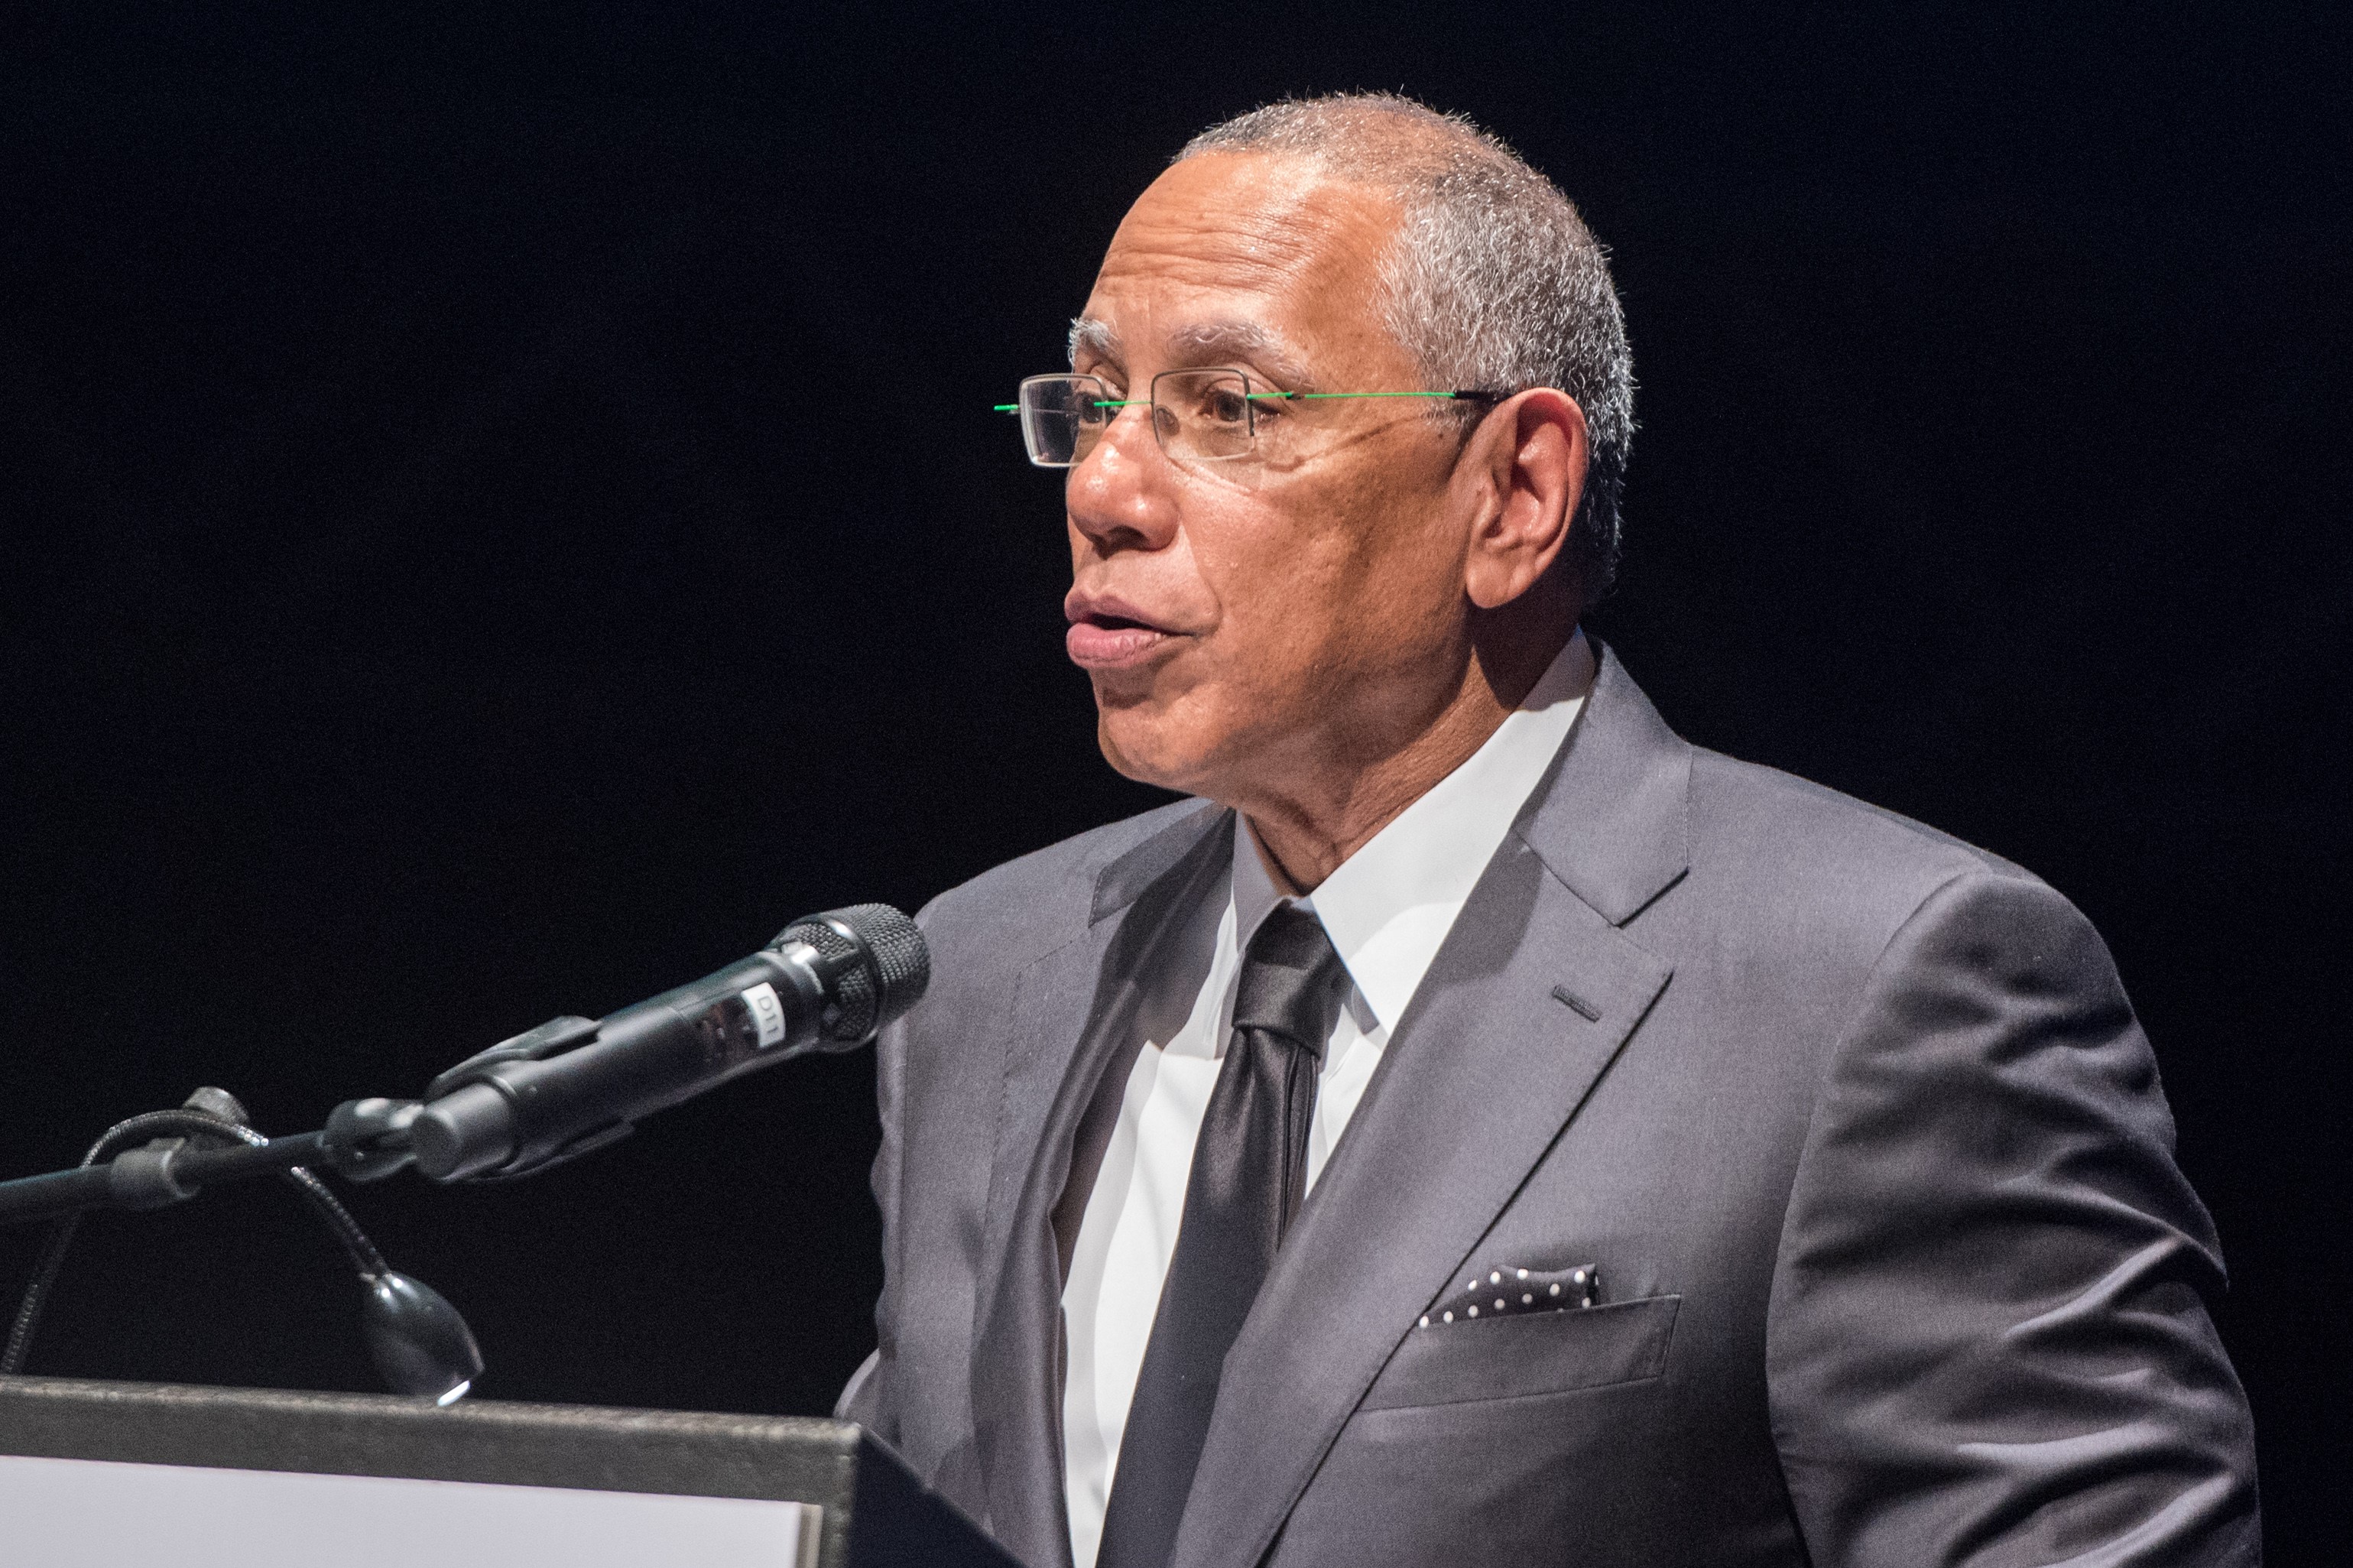 The editor-in-chief of "The New York Times", Dean Baquet, speaking during the awards ceremony of the Marion Donhoff Prize for International Understanding and Reconciliation in Hamburg, Germany, 03 December 2017.